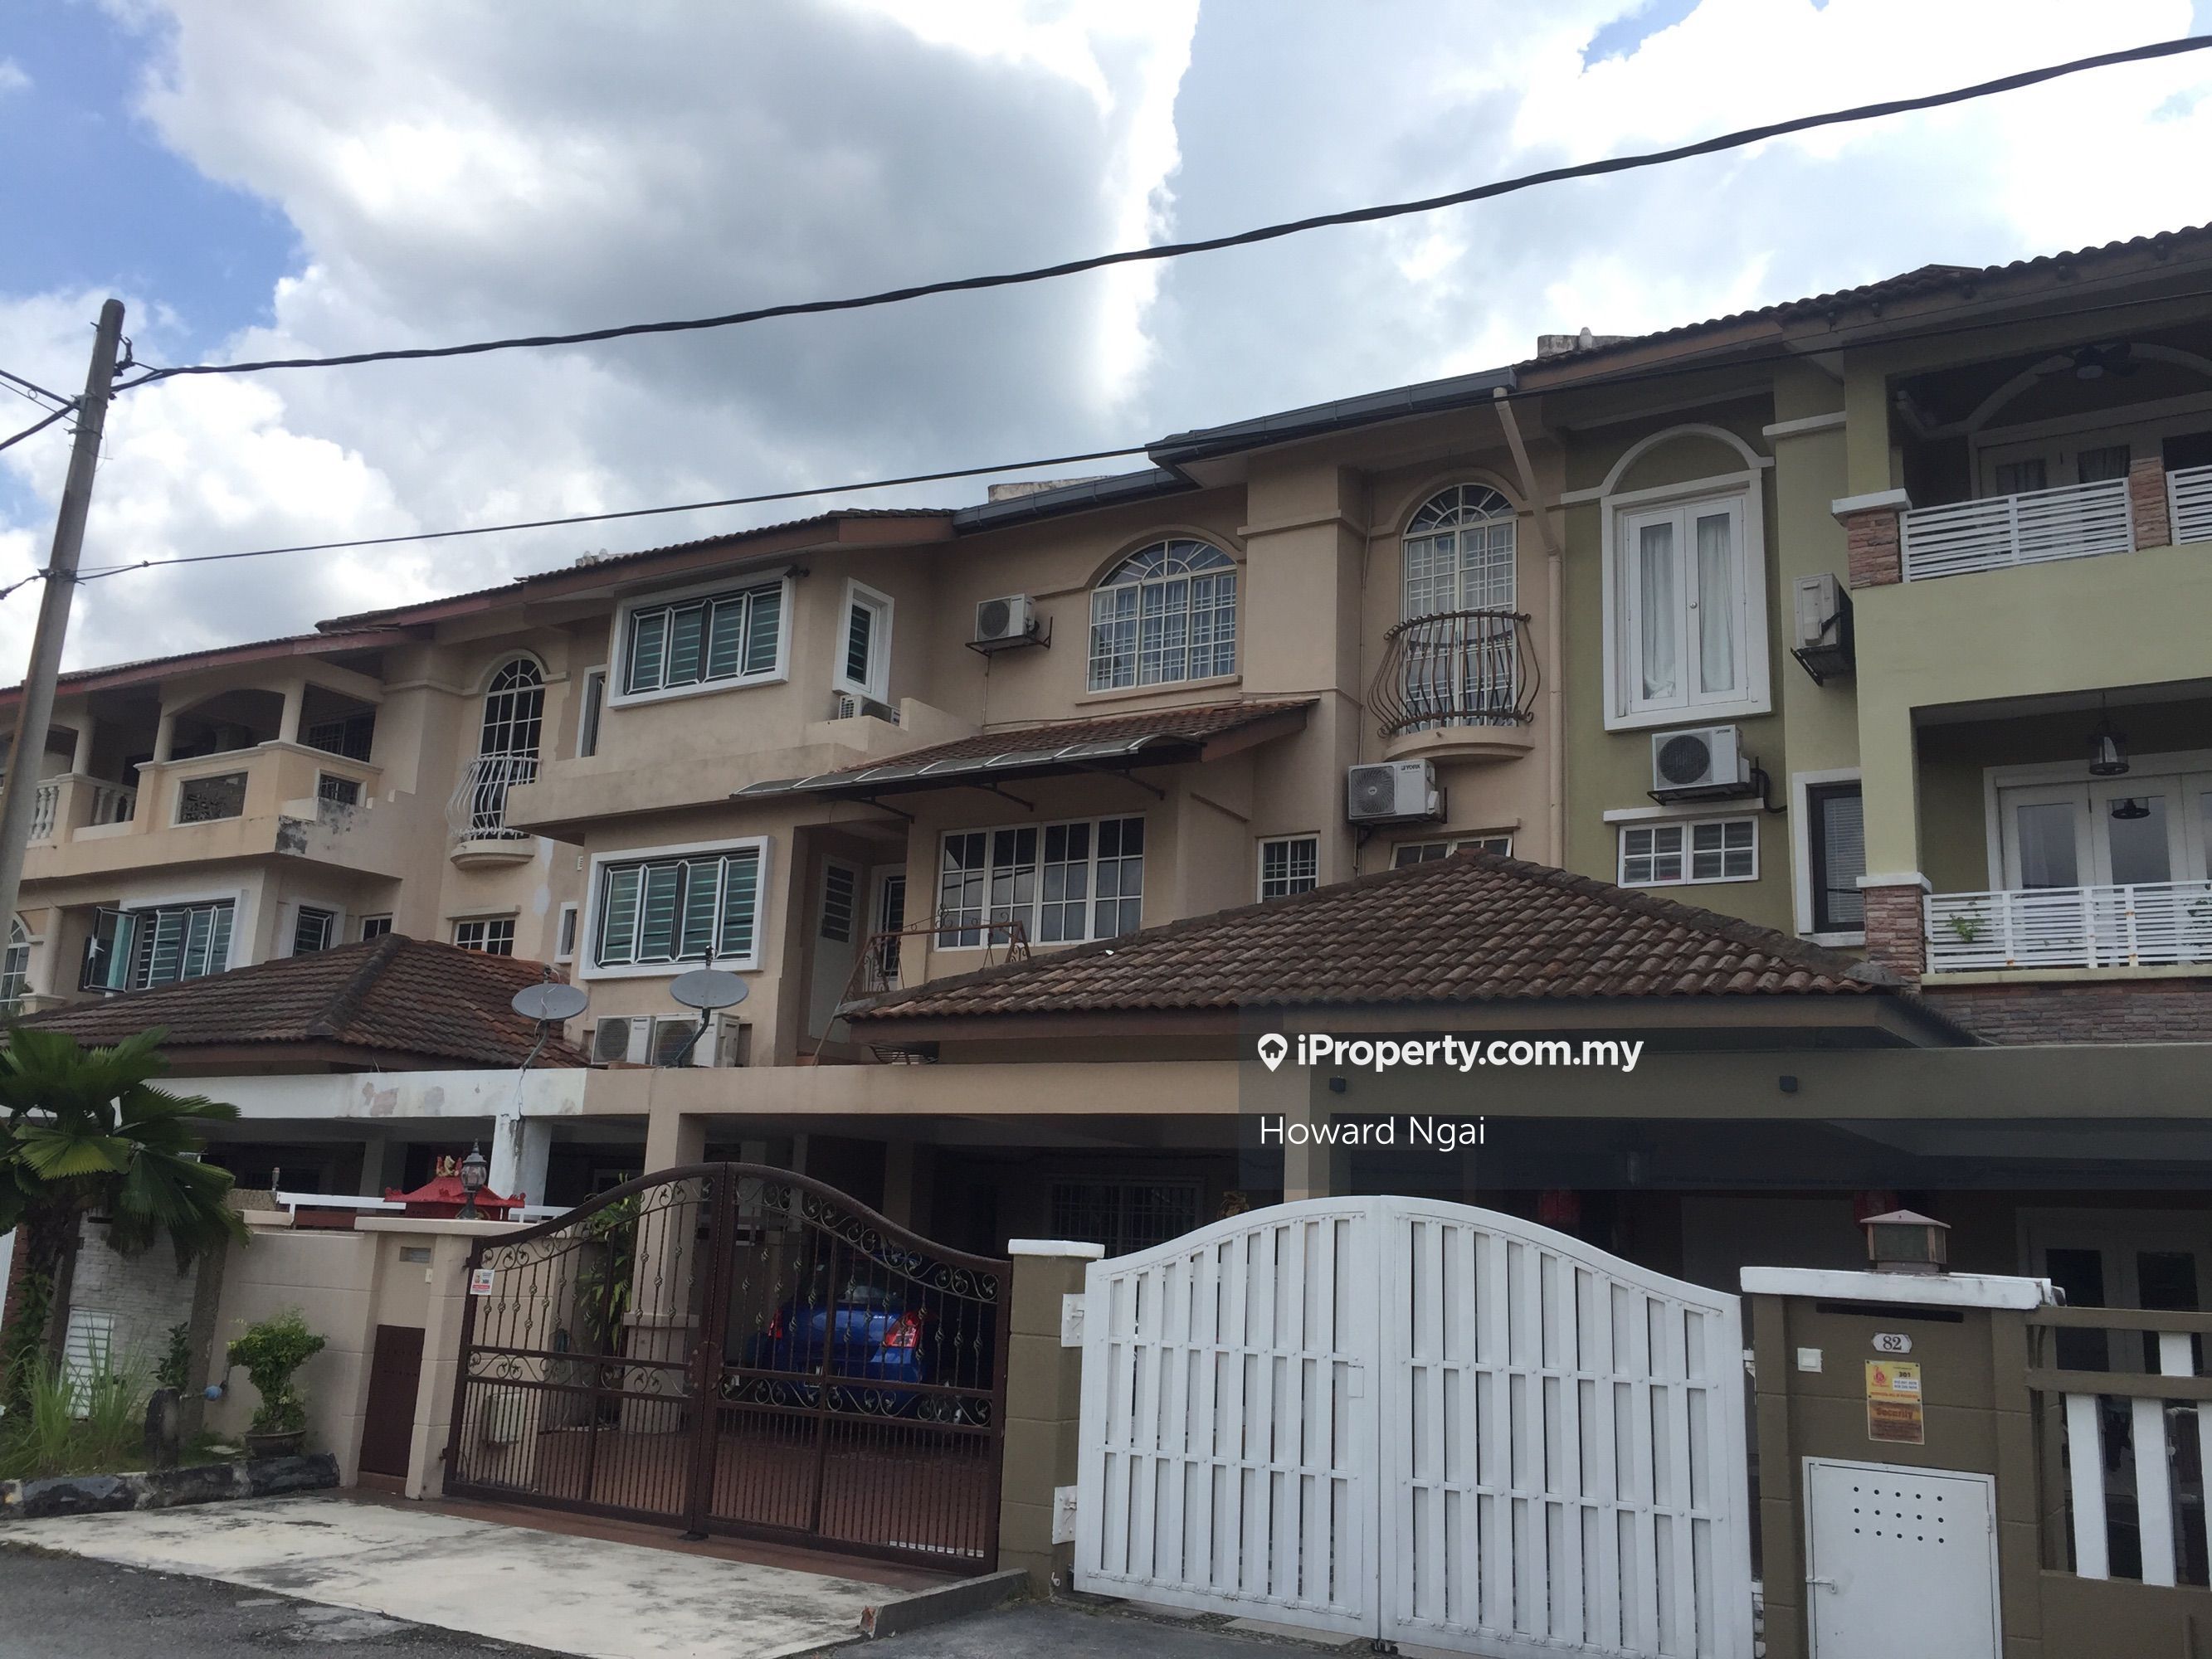 Bandar Puteri Puteri 8 Puchong Bandar Puteri Puchong Intermediate 2 5 Sty Terrace Link House 5 Bedrooms For Sale Iproperty Com My